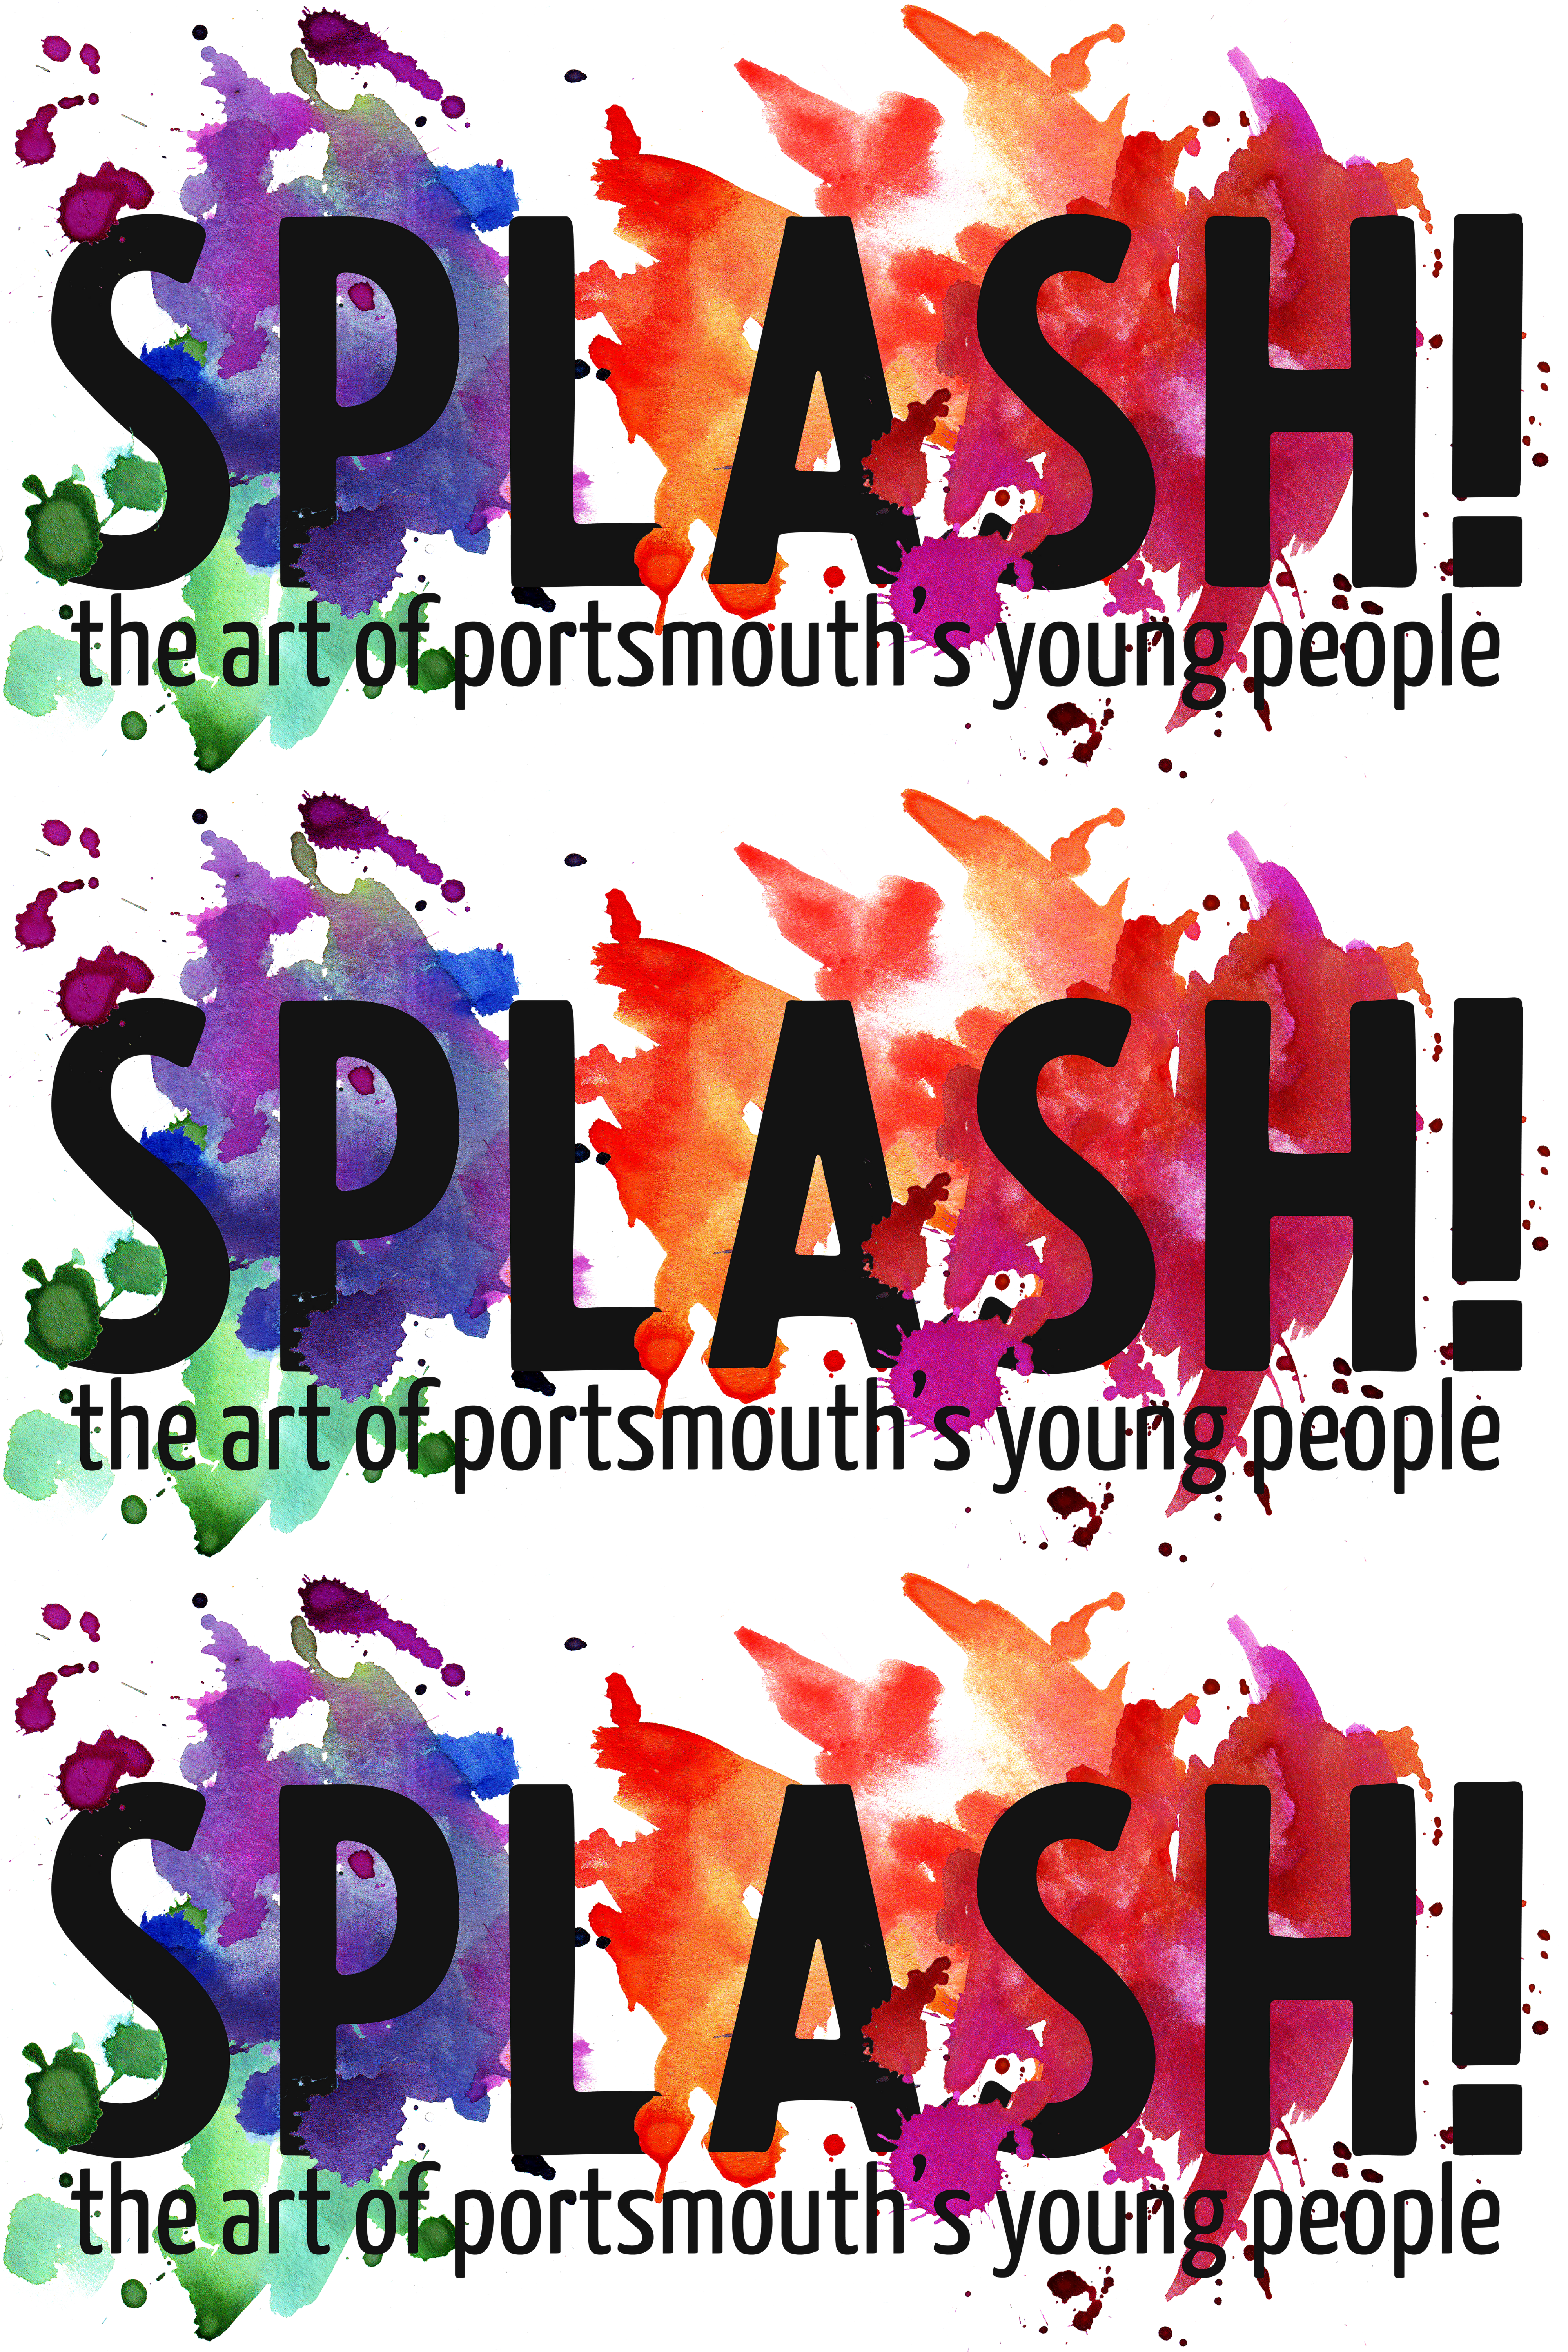 SPLASH! the art of Portsmouth's young people (text over watercolor splashes)